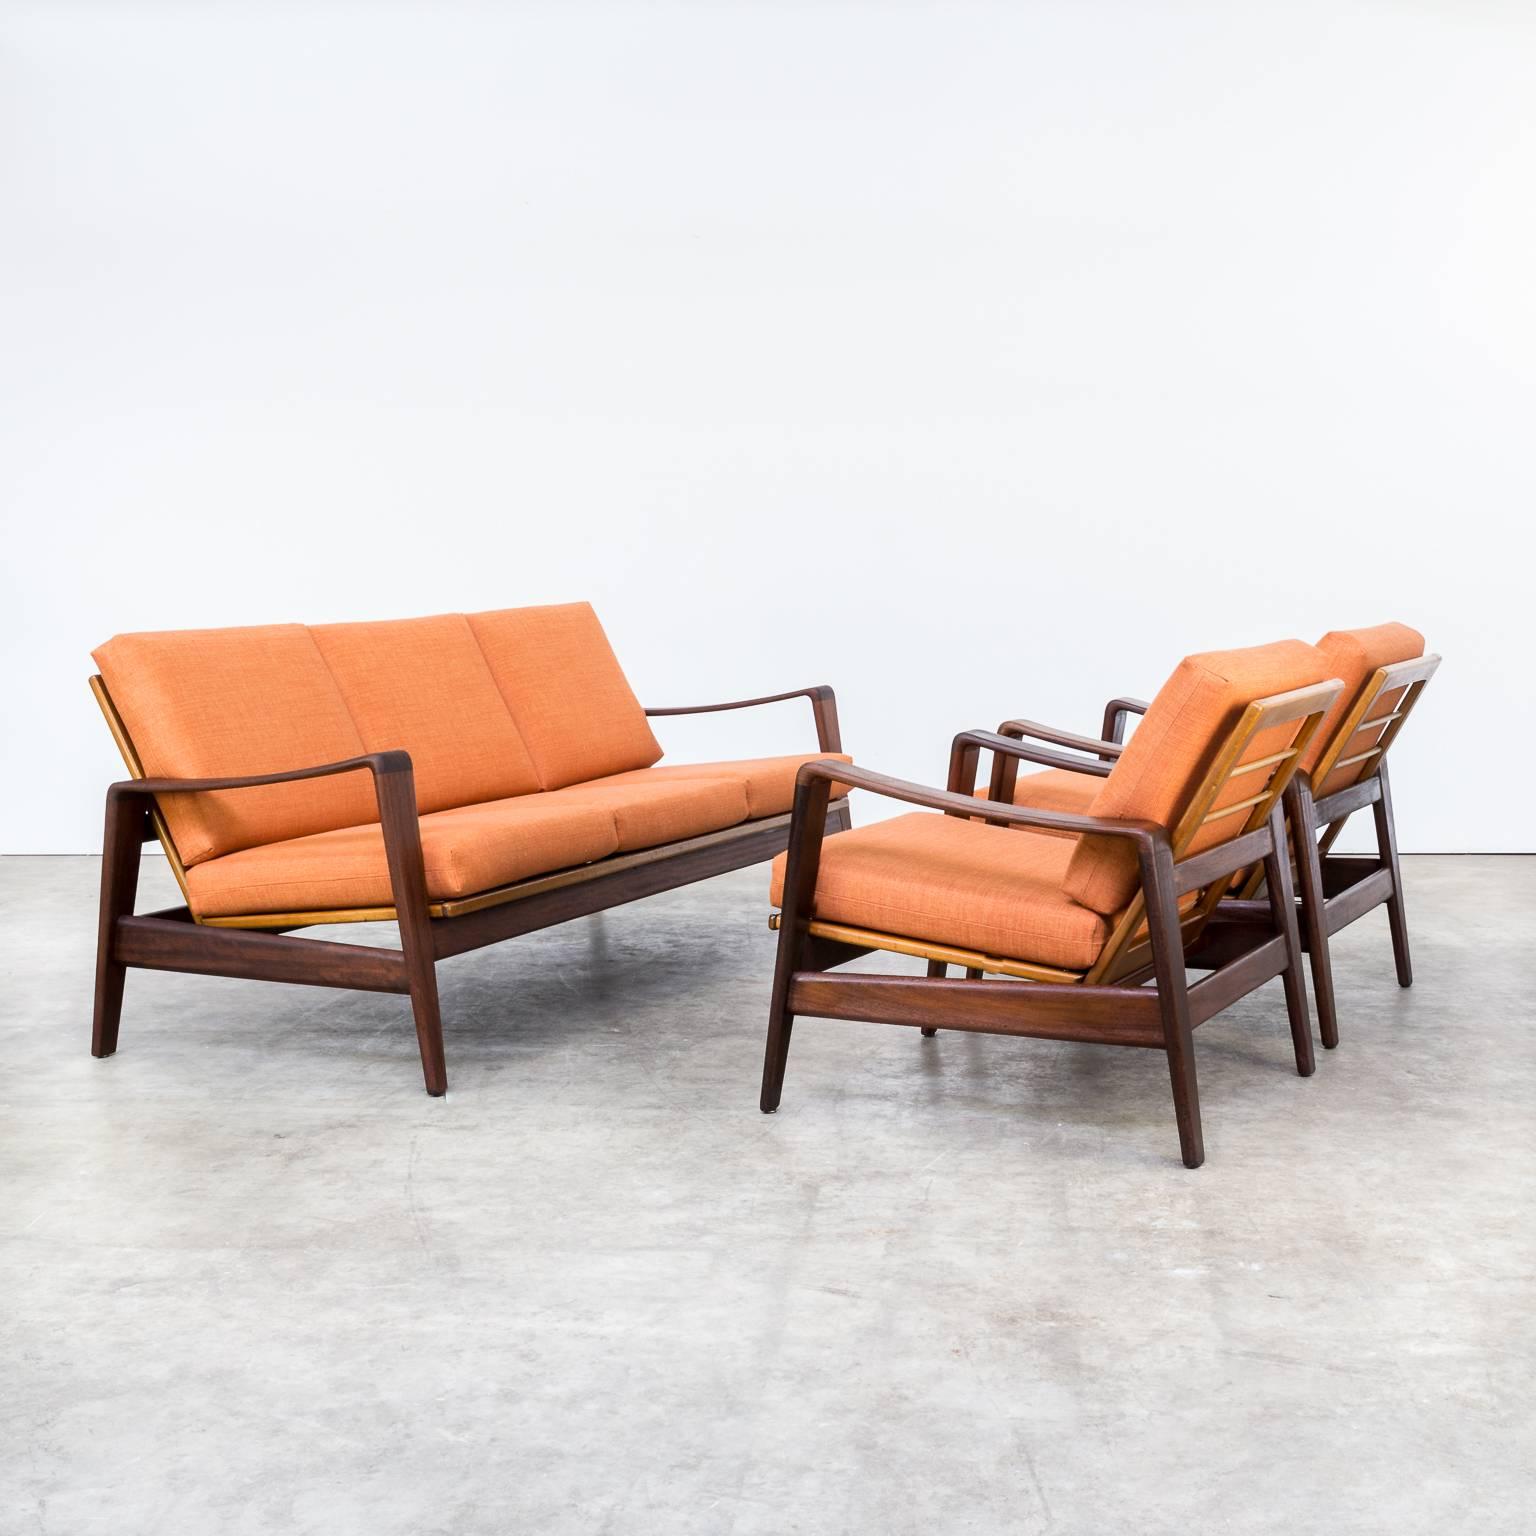 One seating group of two fauteuils and one sofa of Arne Wahl Iversen new upholstered for Komfort. Danish design. Teak frame, new orange high quality fabric. Very good condition. Dimensions: sofa: 176cm (W) x 74cm (D) x 73cm (H) faut: 69cm (W) x 64cm